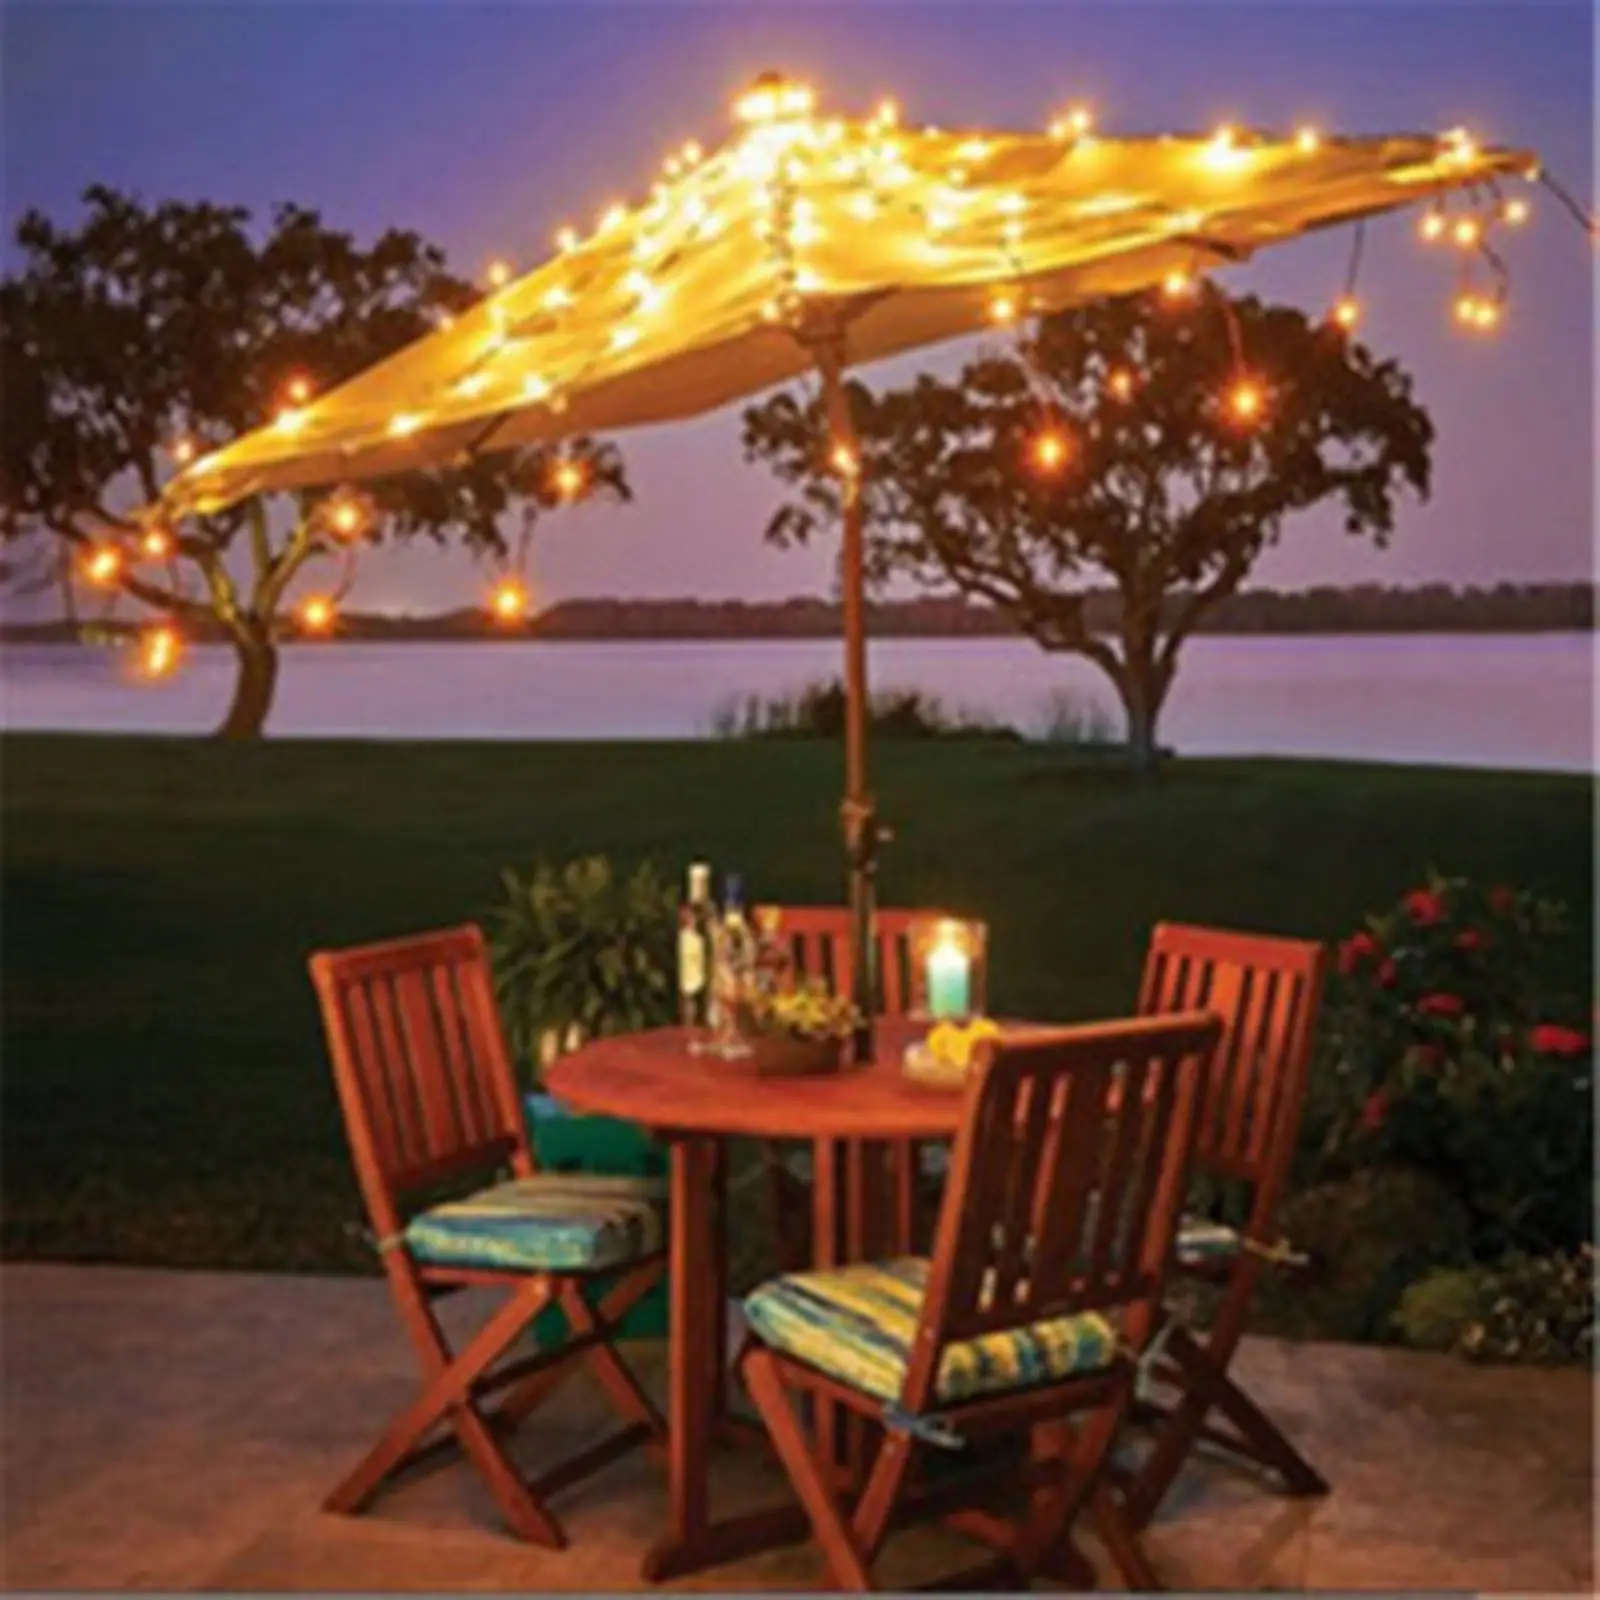 Patio Umbrella Parasol Lights 104LEDs Battery Operated 8 Lighting Mode Waterproof Tent String Light & Remote Control Decoration